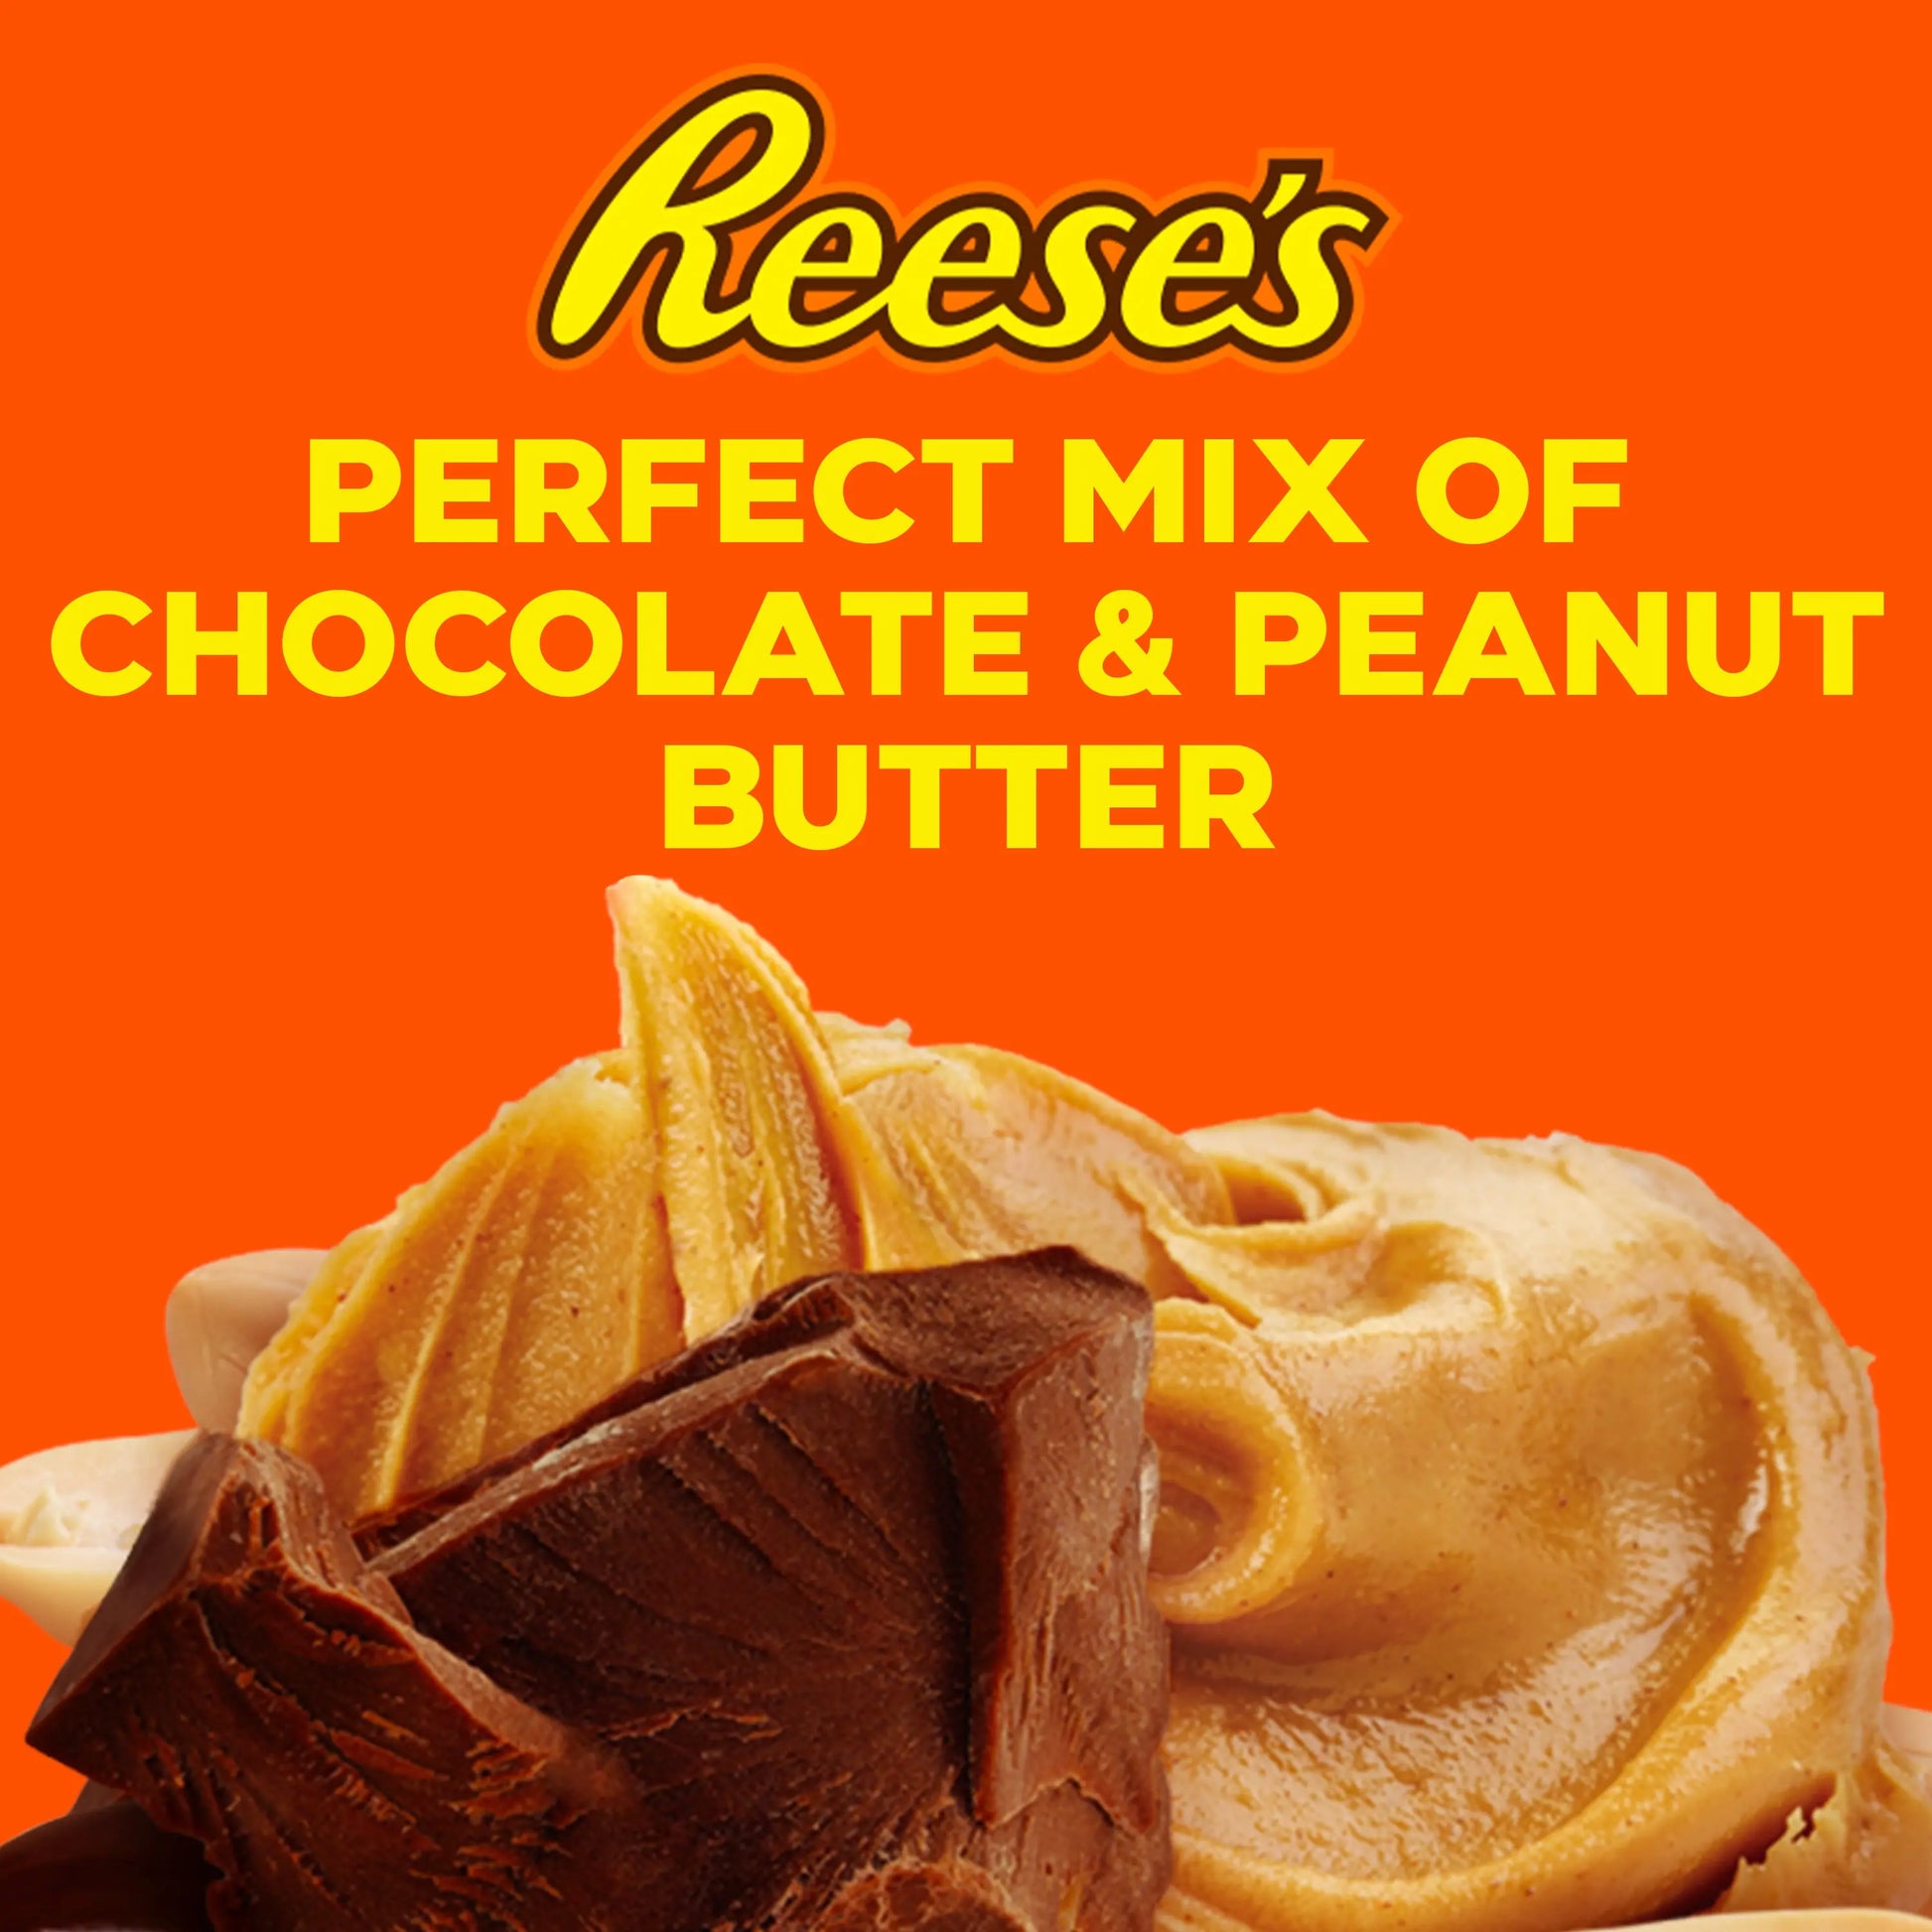 Reese's Miniatures wrapped Chocolate Peanut Butter Cups 340 gr Reese's